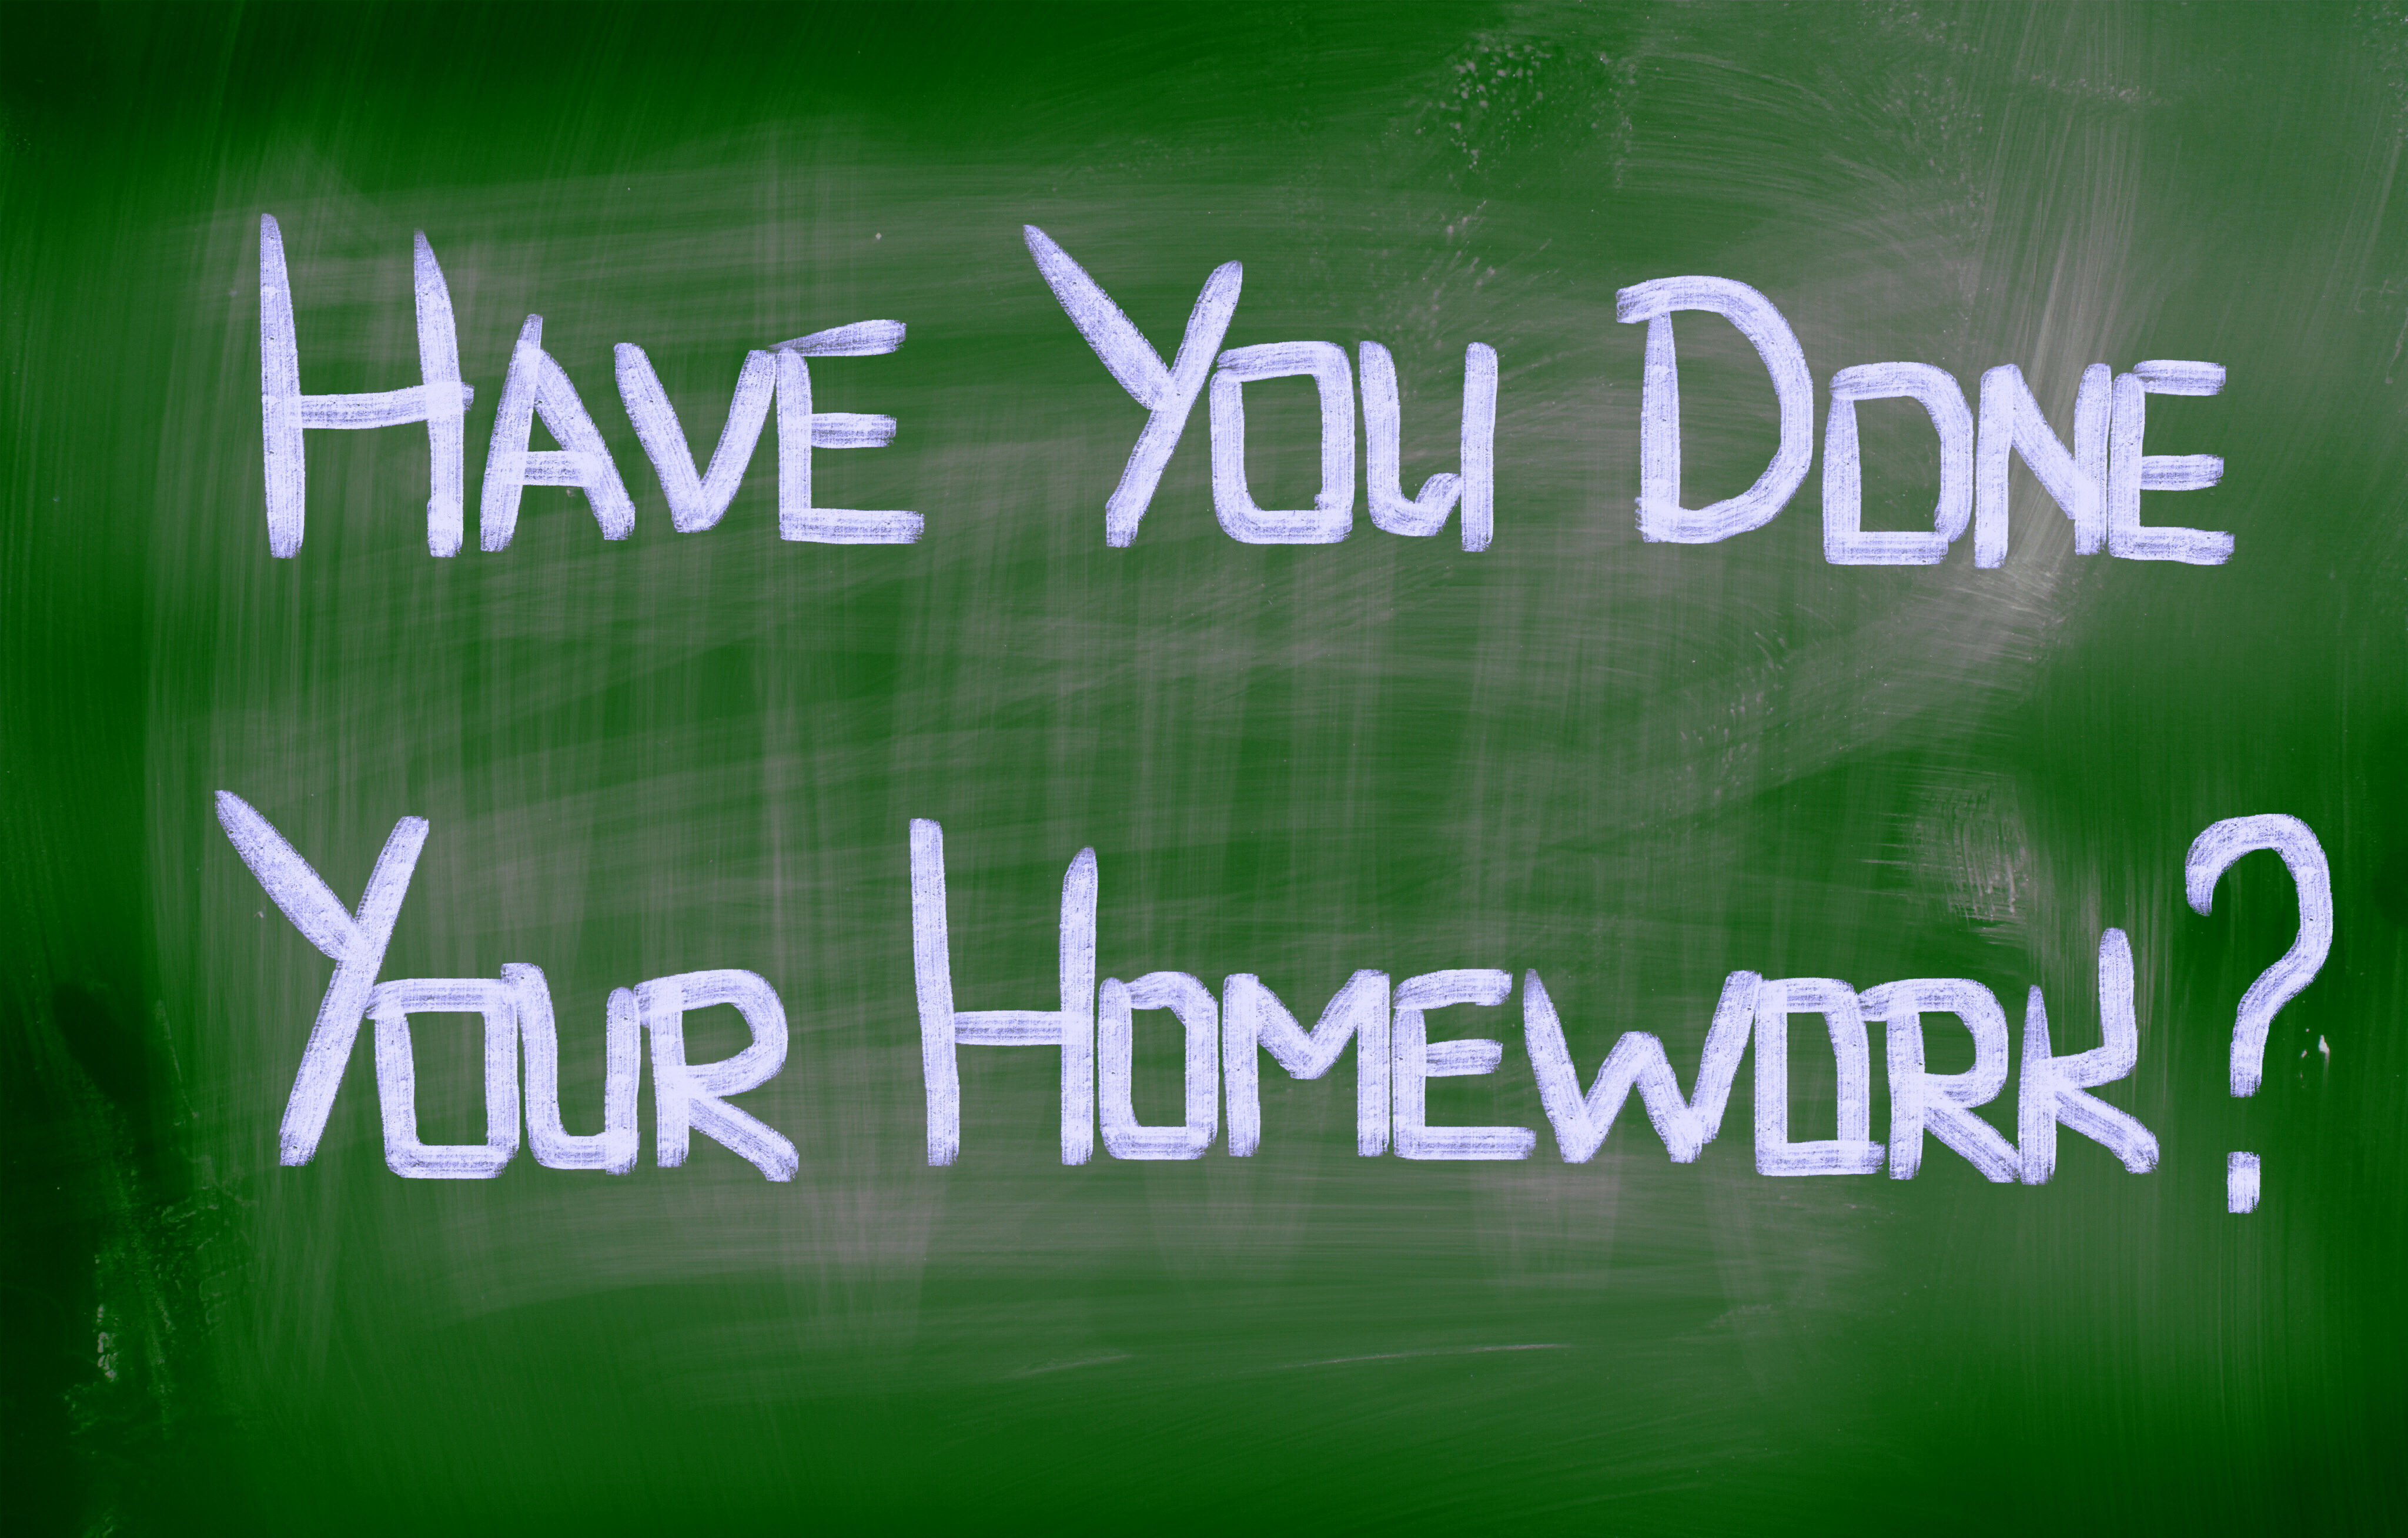 have you done your homework yet or already